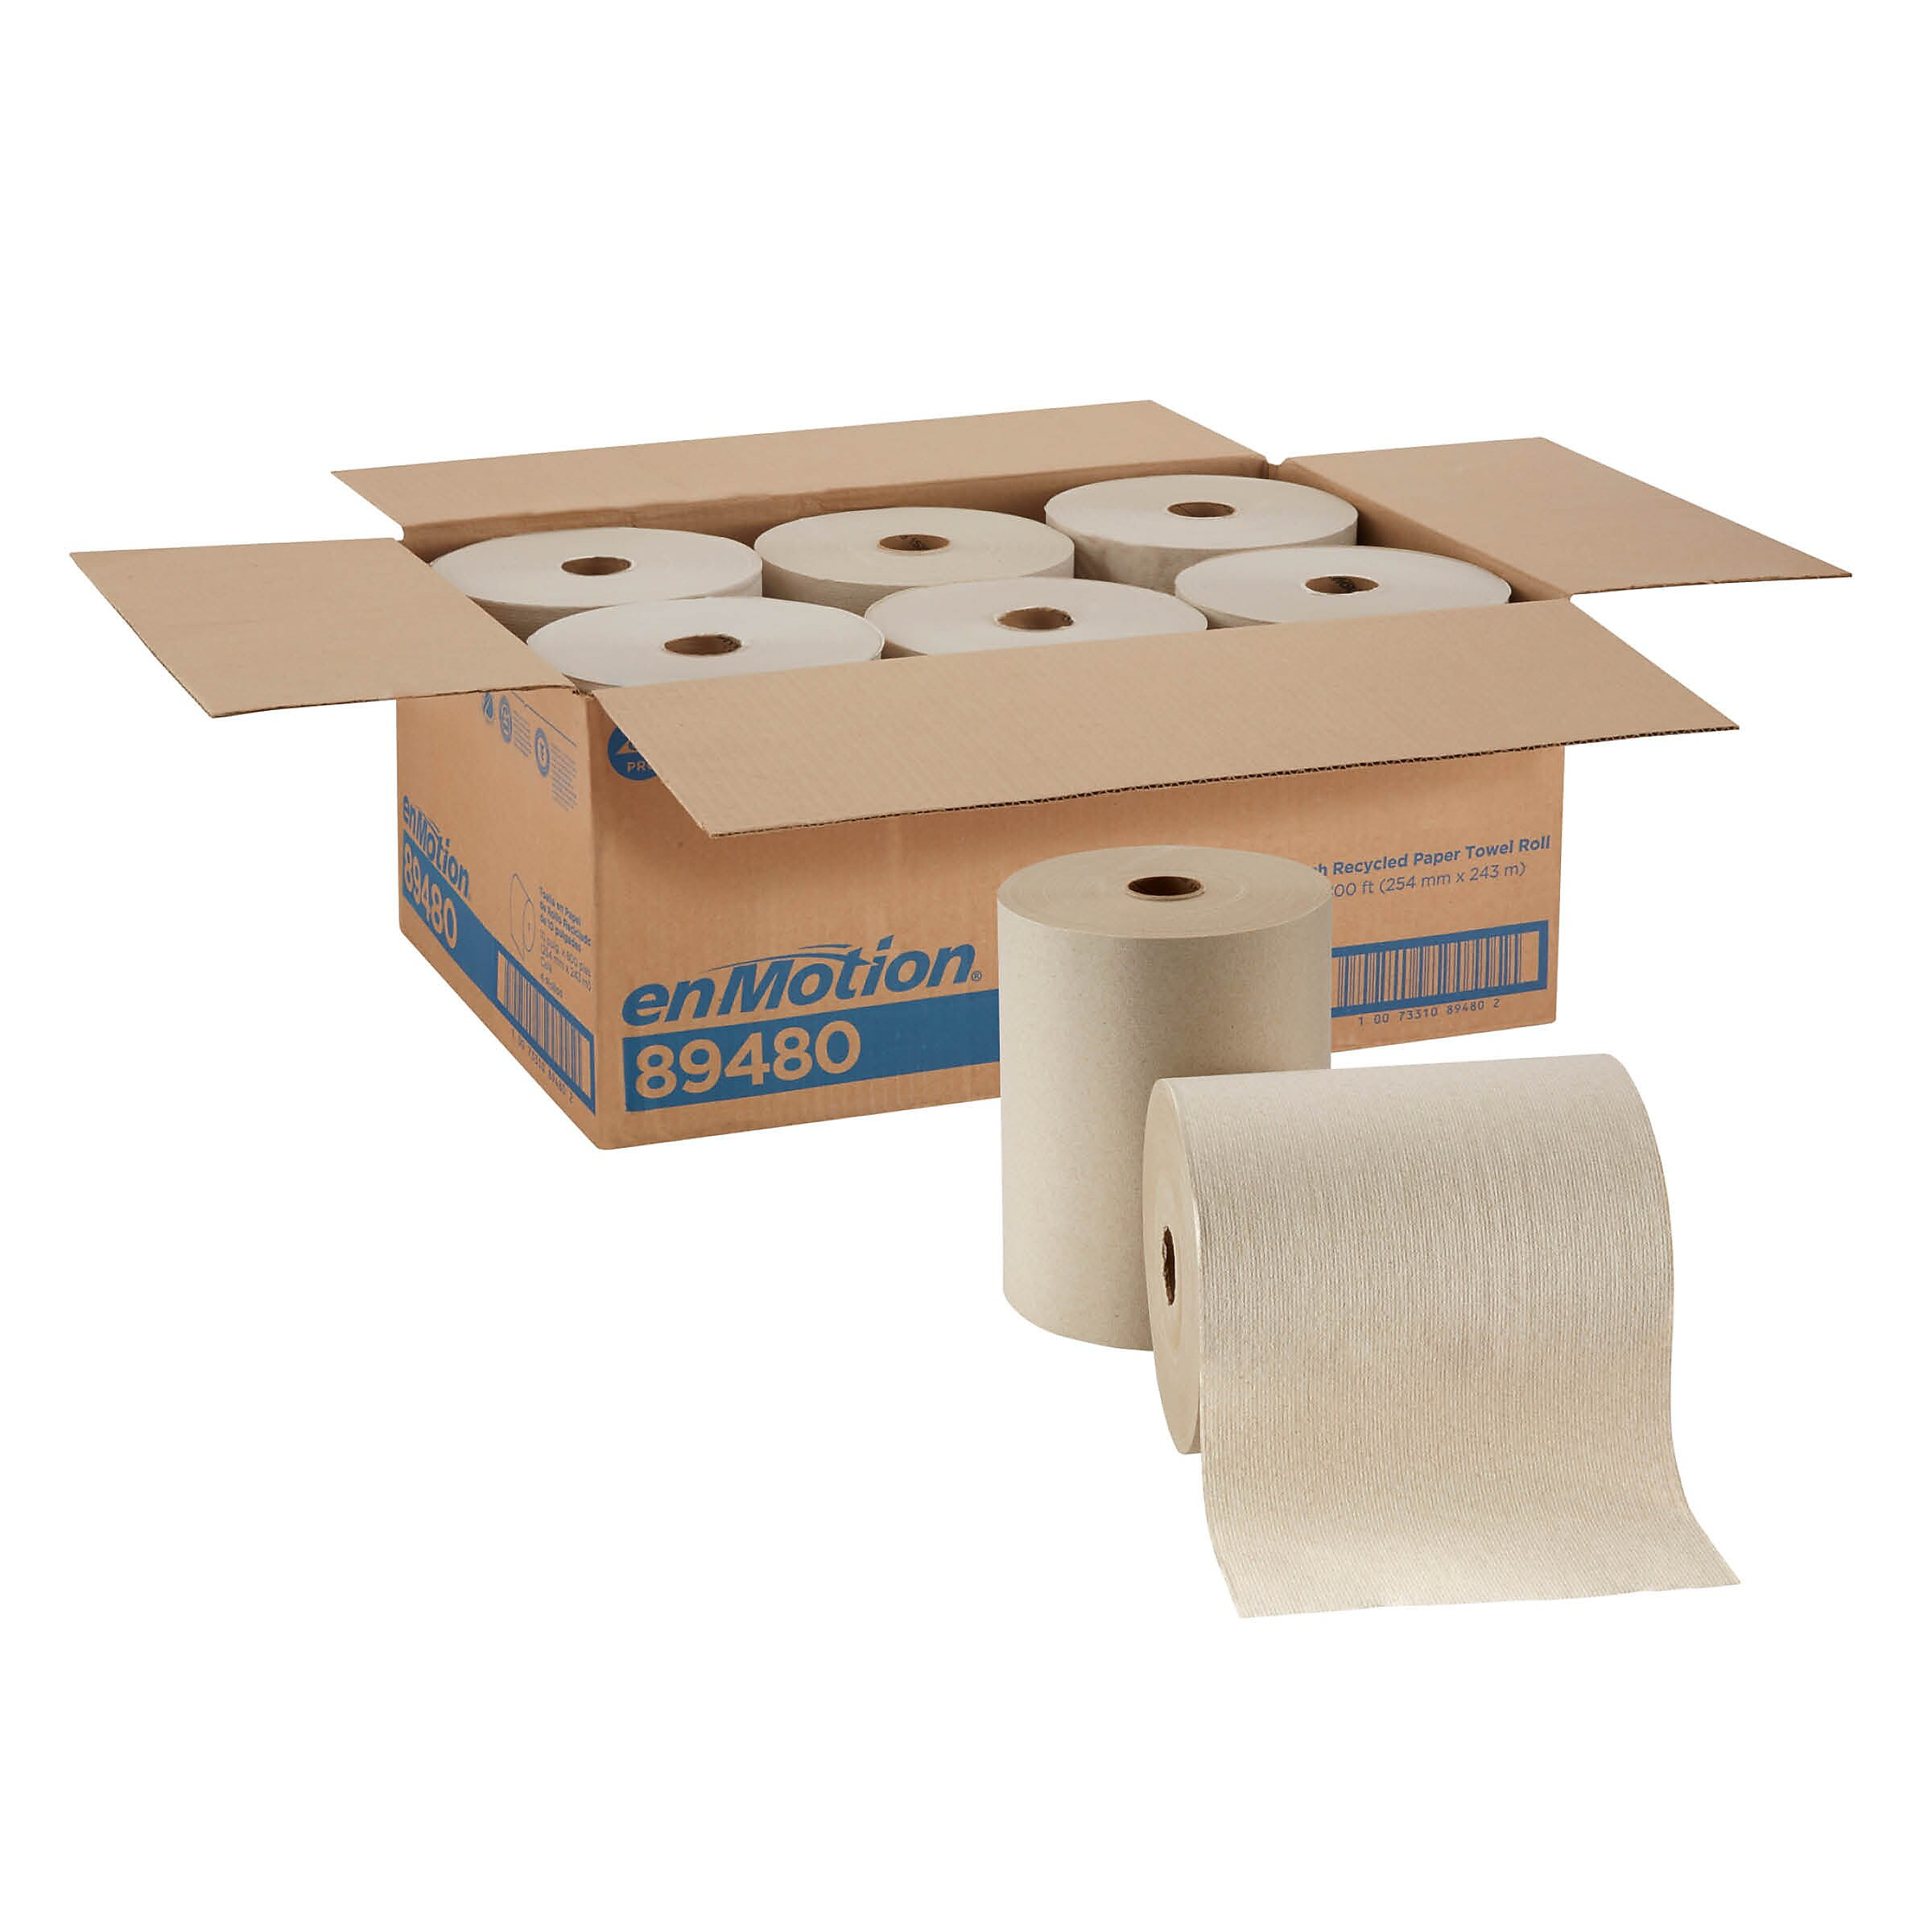 ENMOTION® 10” RECYCLED PAPER TOWEL ROLLS BY GP PRO WHITE 6 ROLLS 89470 